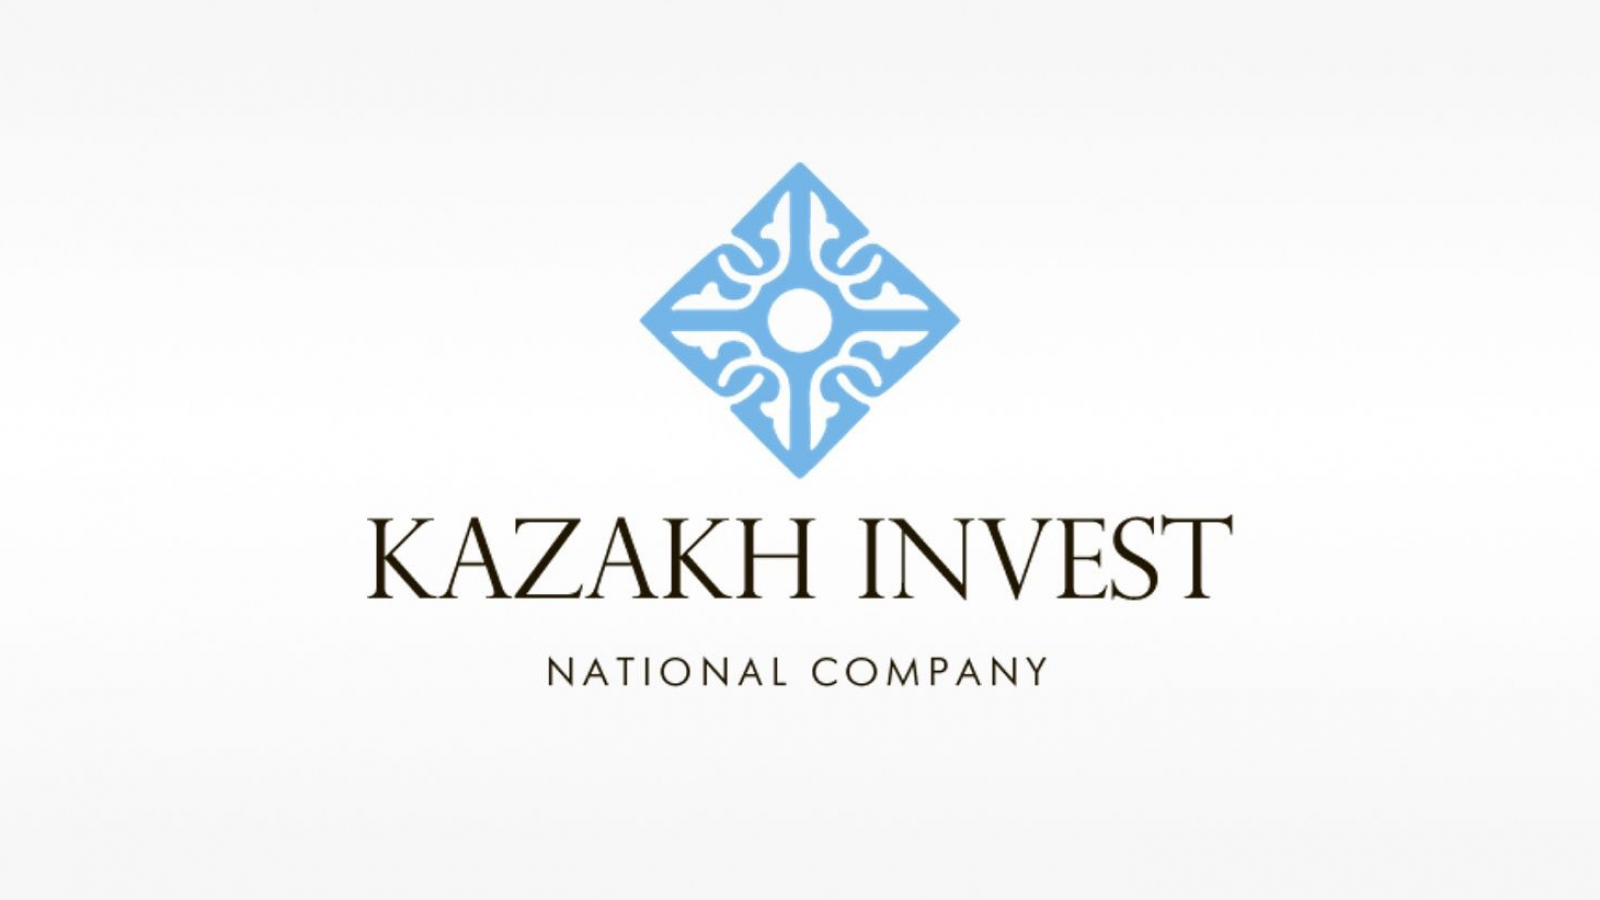 Government of the Republic of Kazakhstan: The new Law of the Republic of Kazakhstan on the Return of Illegally Acquired Assets to the State will not affect conscientious investors